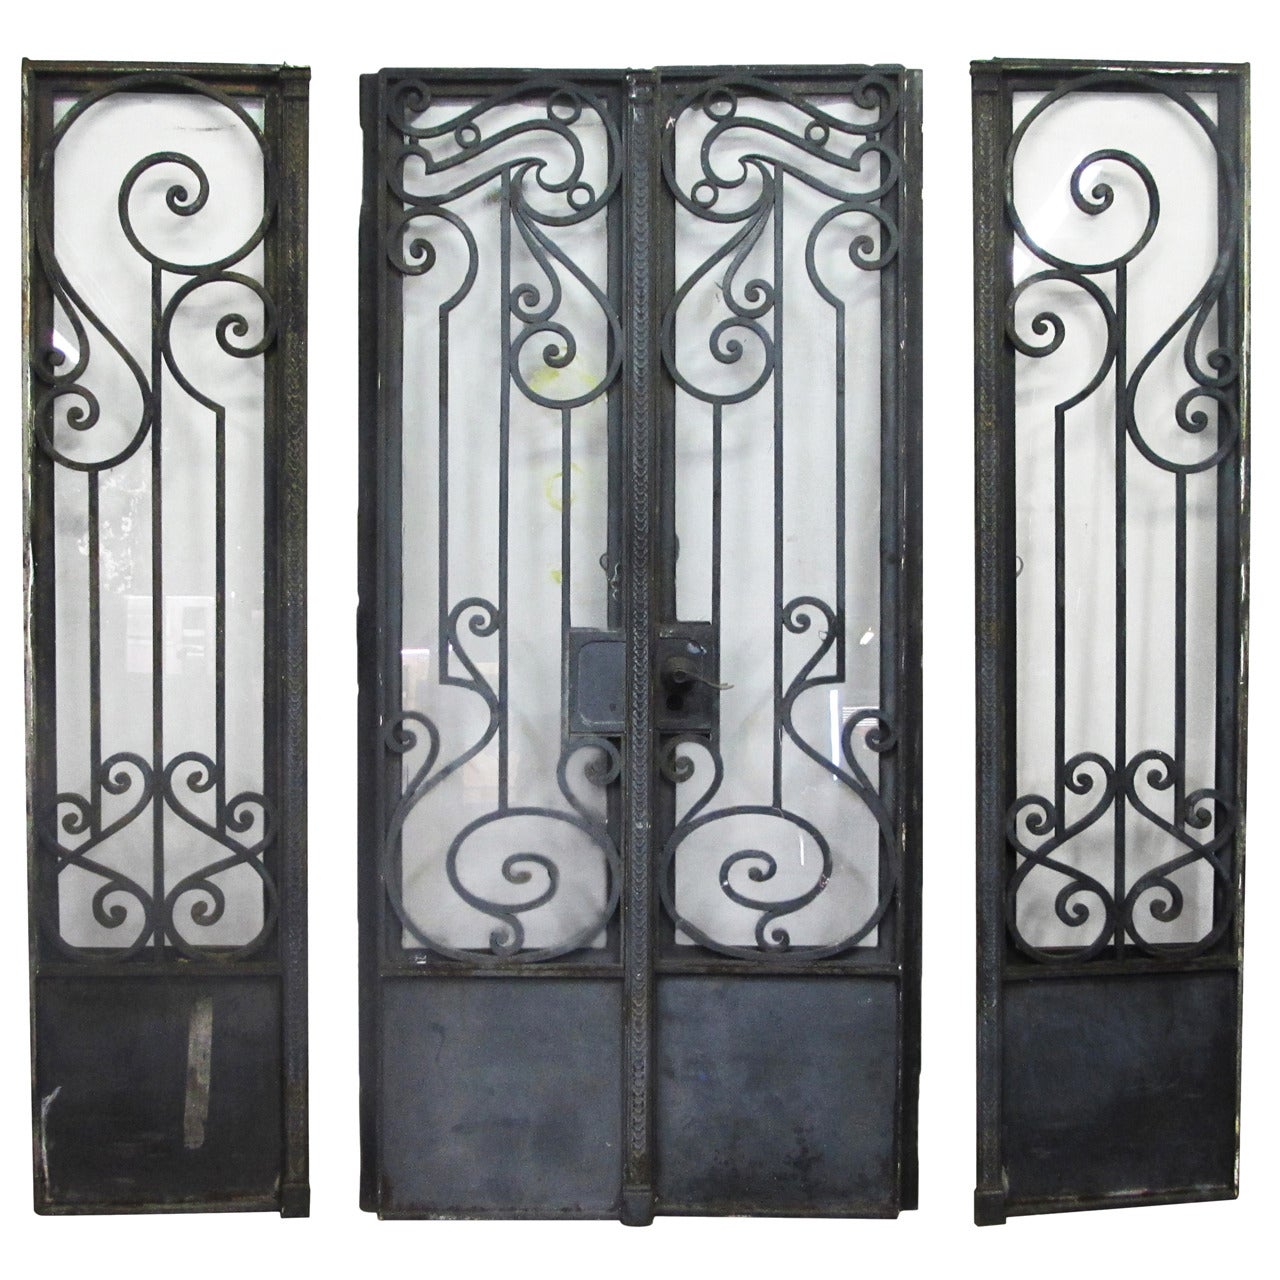 1905 Brooklyn Art Nouveau Brownstone Iron Door Set with Matching Sidelights